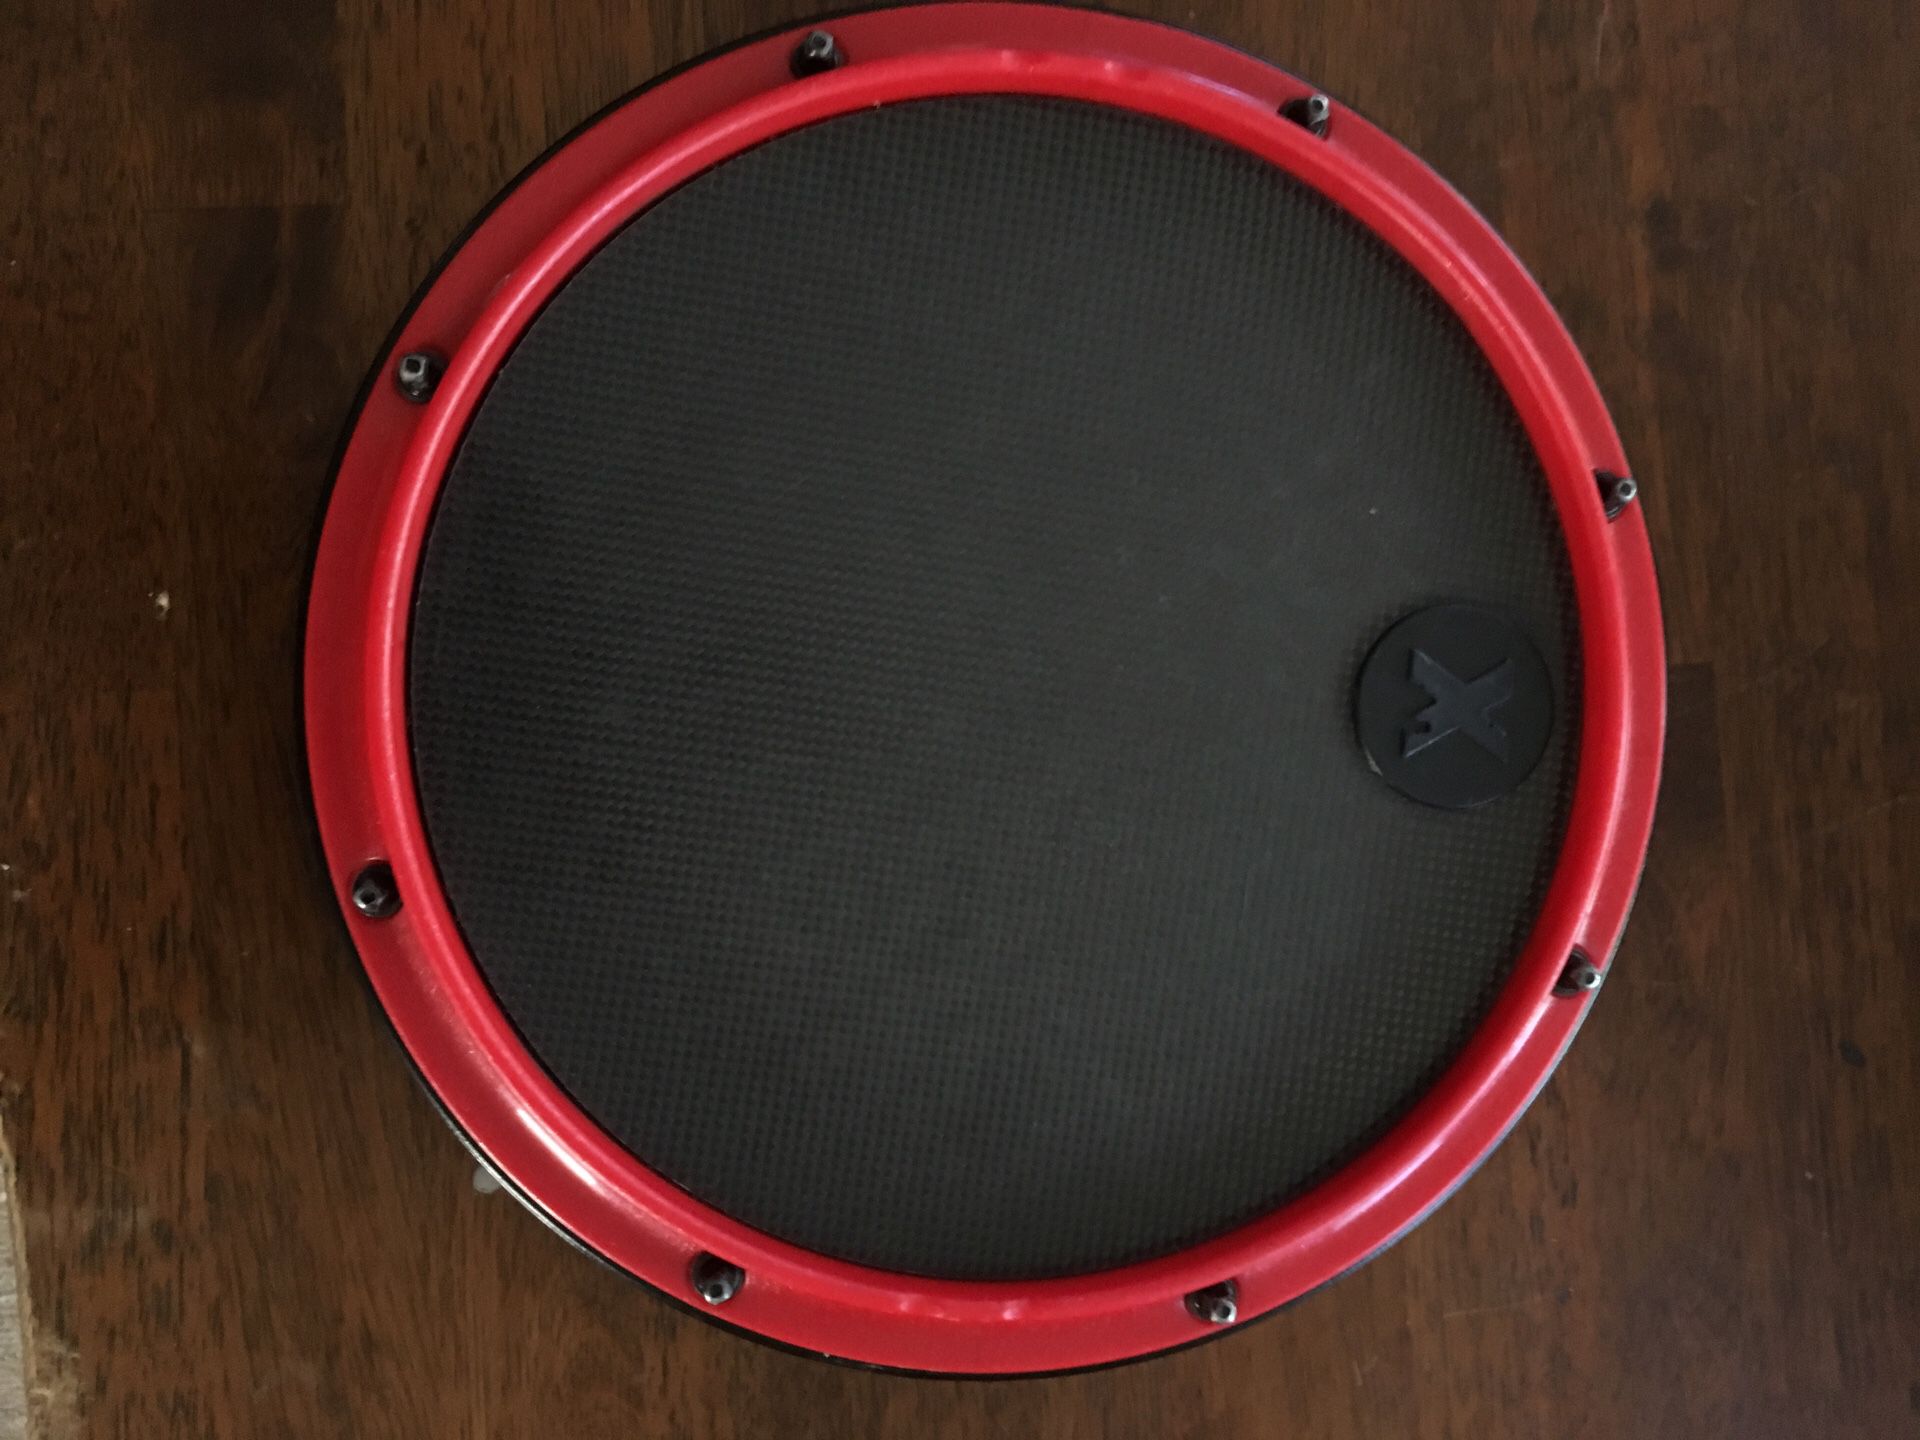 Xymox 12” Reserve Snare Pad for Sale in Chino Hills, CA - OfferUp